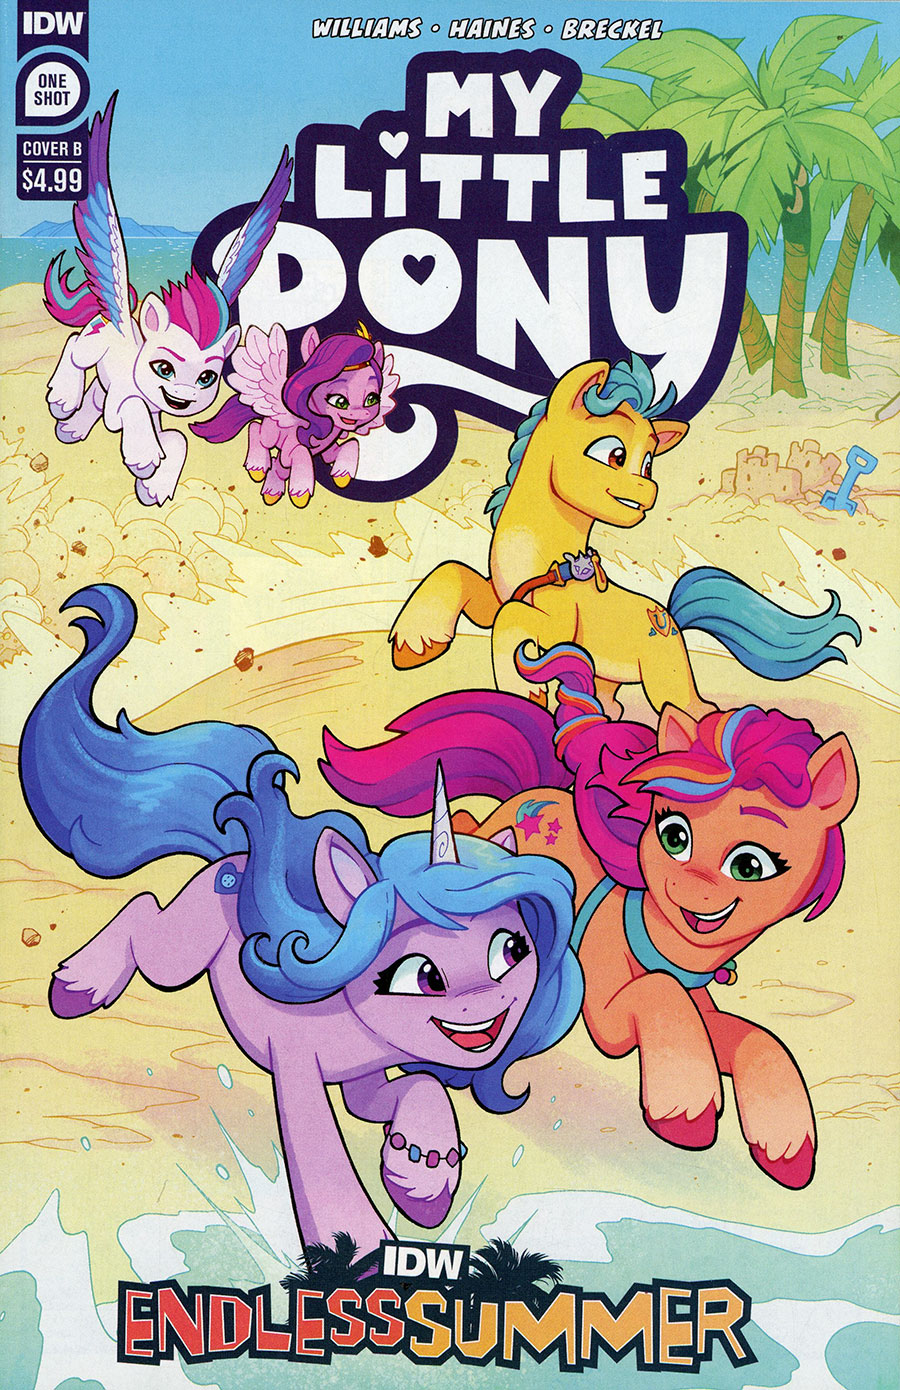 IDW Endless Summer My Little Pony #1 (One Shot) Cover B Variant Jack Lawrence Cover